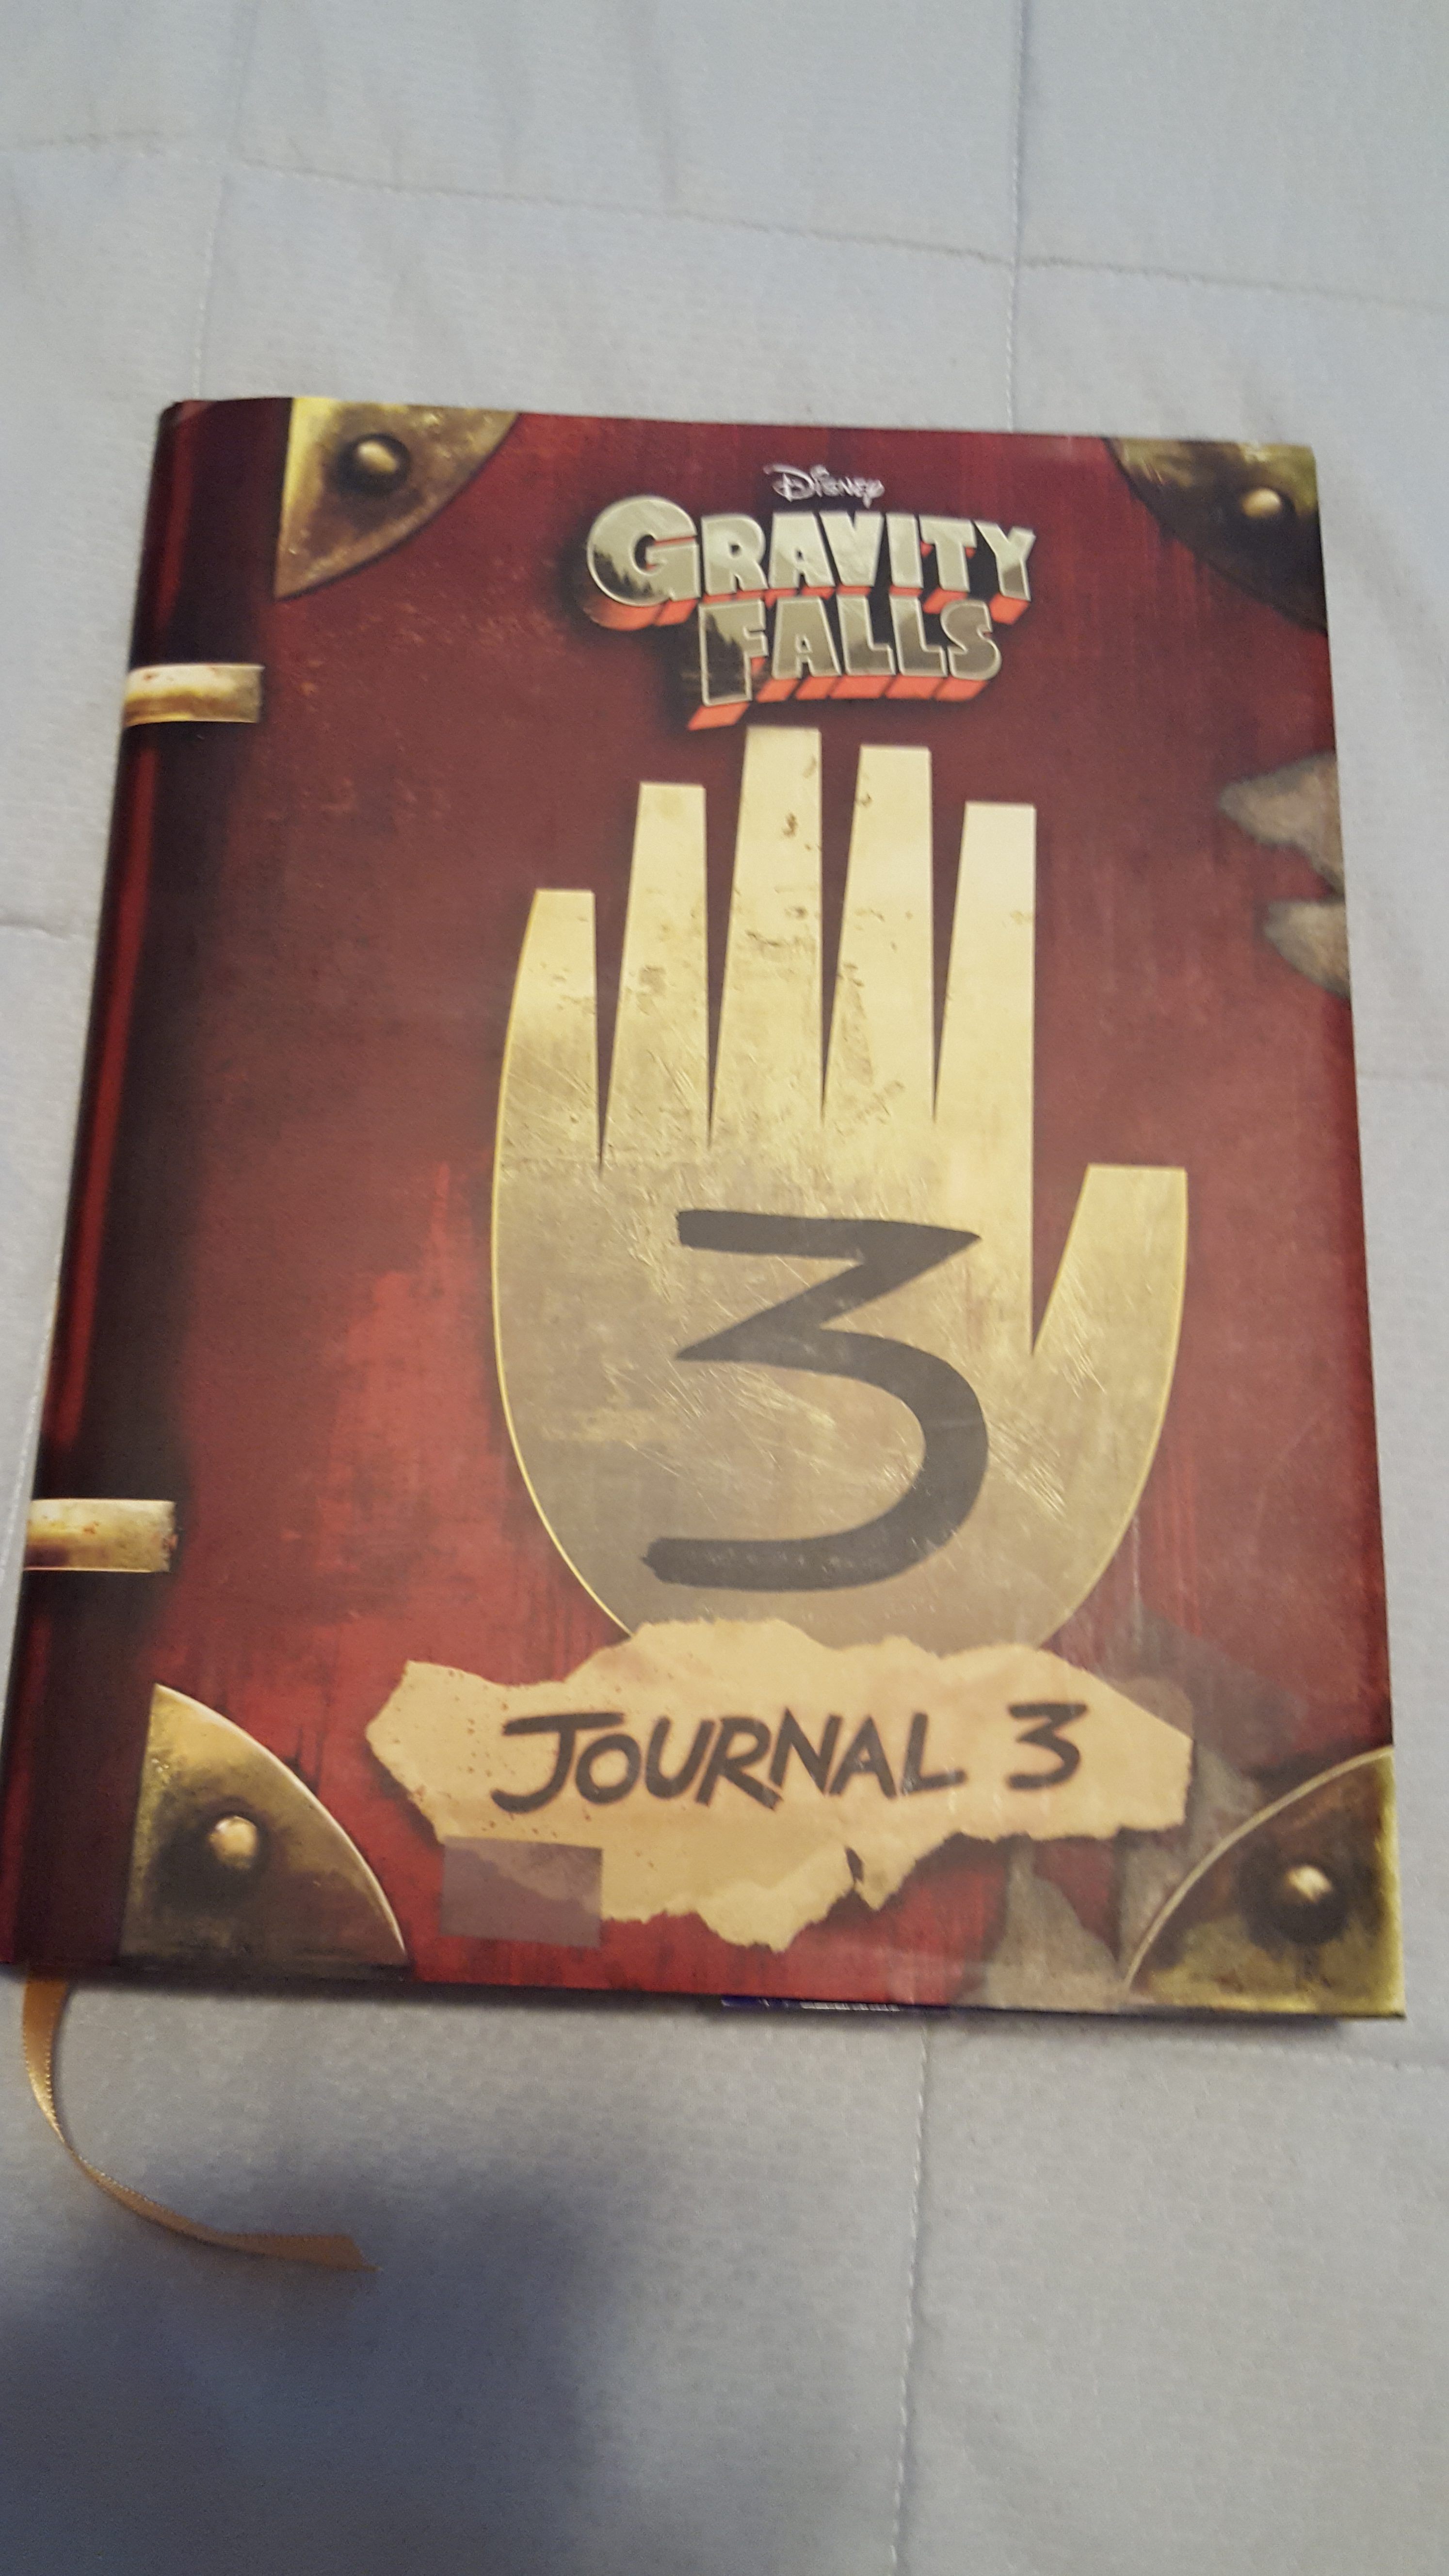 BOOK REVIEW Gravity Falls Journal 3 by Alex Hirsch and Rob Renzetti